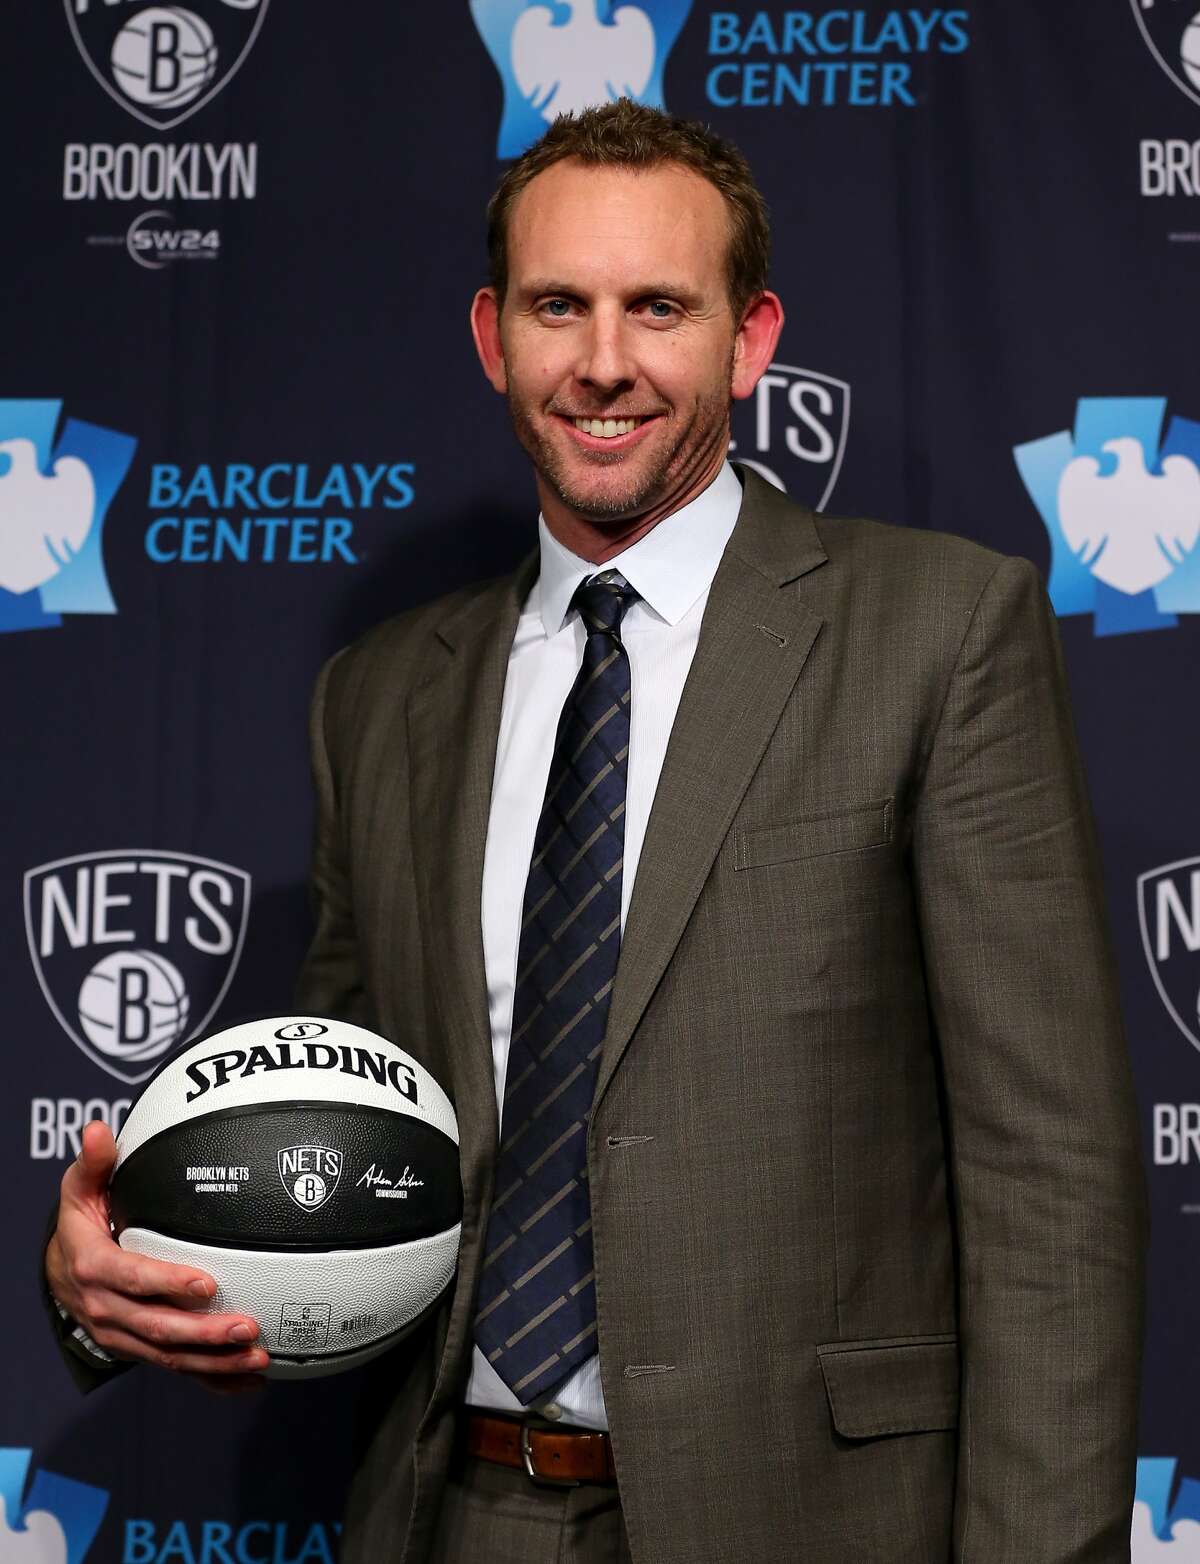 NEW YORK, NY - FEBRUARY 19: Sean Marks, General Manager of the Brooklyn Nets, poses with a ball after a press conference announcing title at Barclays Center on February 19, 2016 in the Brooklyn borough of New York City. NOTE TO USER: User expressly acknowledges and agrees that, by downloading and or using this photograph, User is consenting to the terms and conditions of the Getty Images License Agreement. (Photo by Elsa/Getty Images)